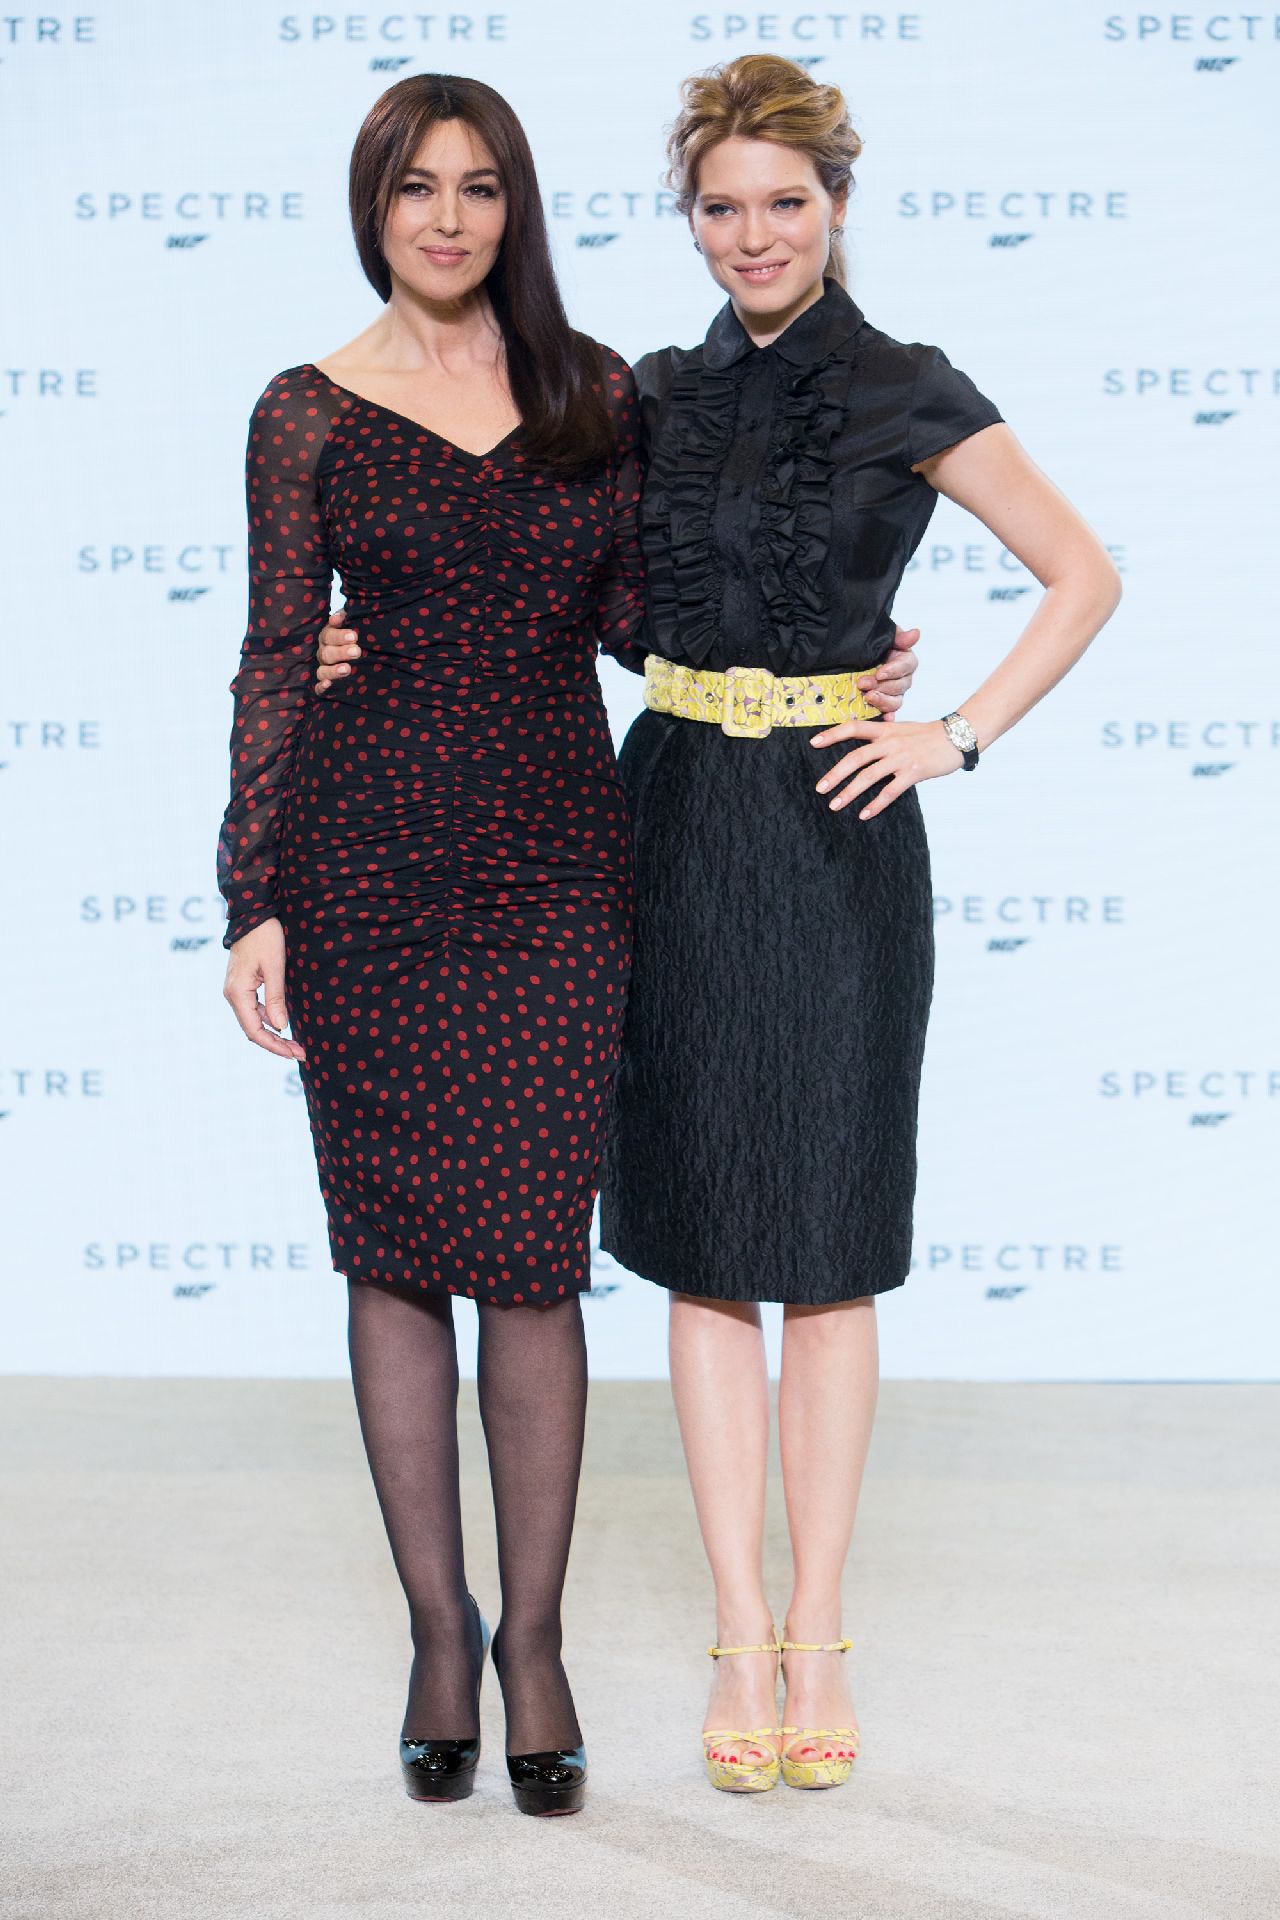 Eon Productions, Metro-Goldwyn-Mayer and Sony Pictures Entertainment announce the 24th James Bond adventure " SPECTRE. " Pictured: (L to R)  Monica Bellucci and LÃ©a Seydoux.